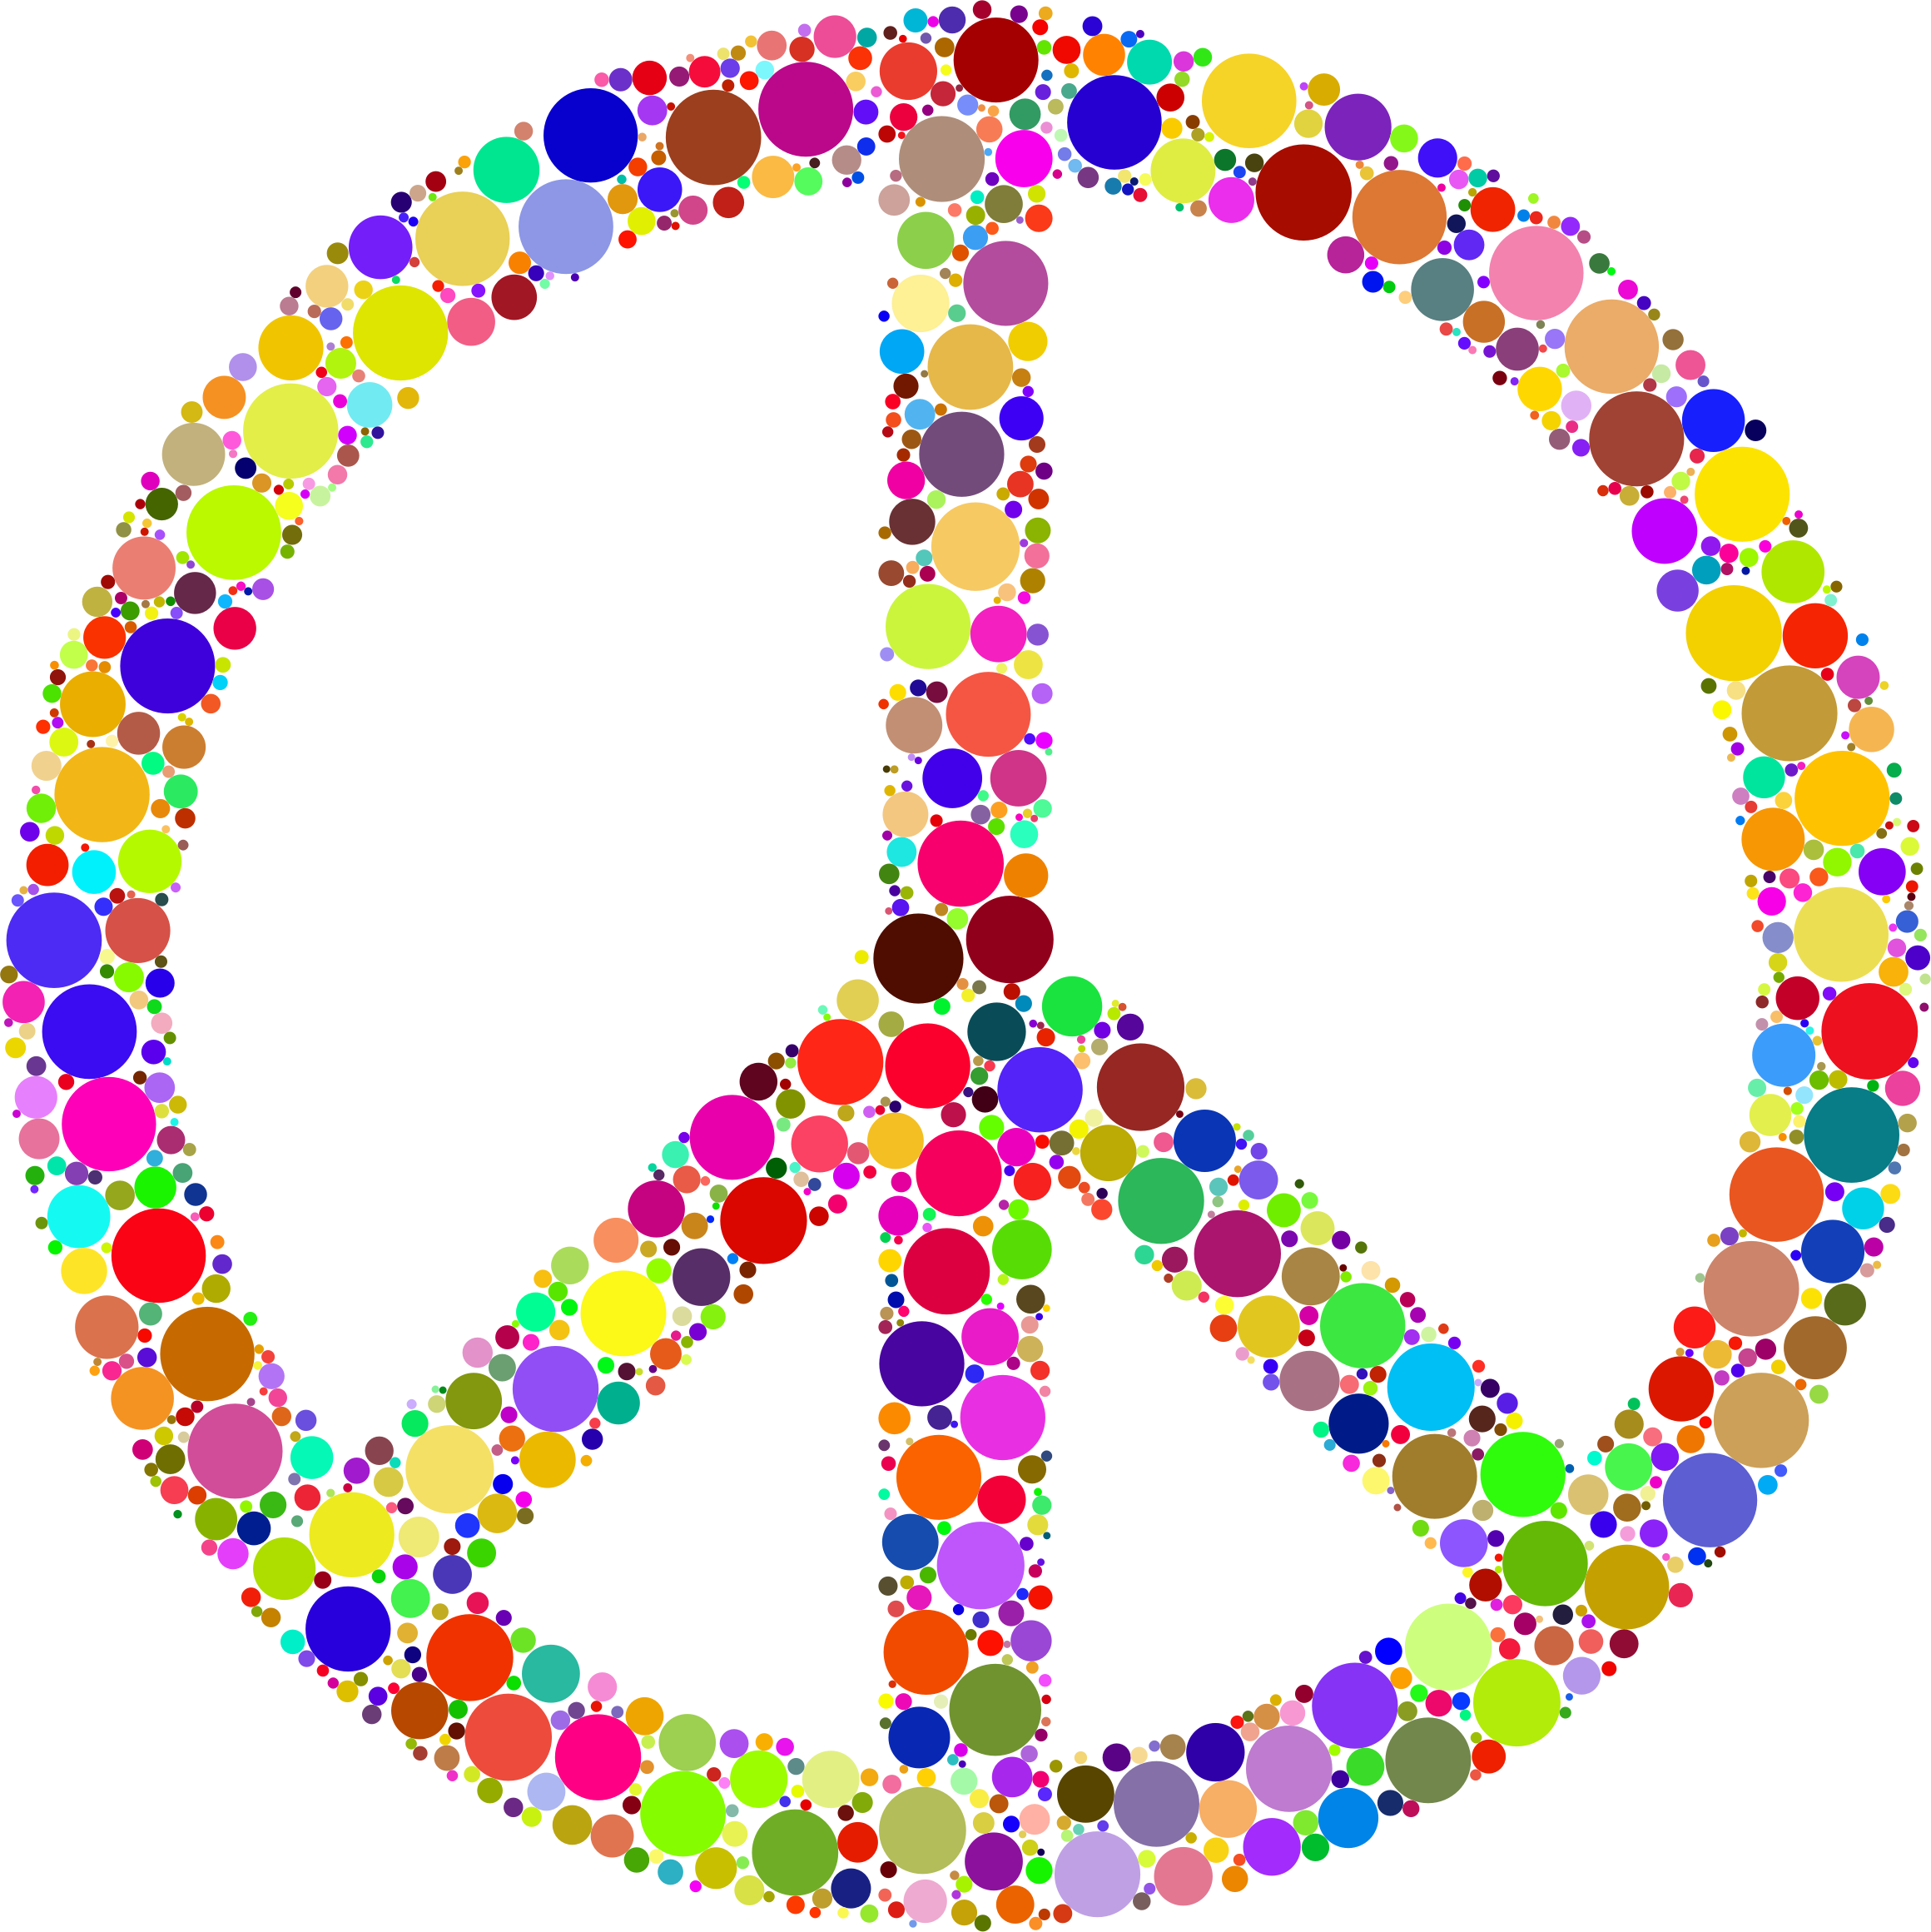 Colorful Circles Peace Sign 2 By Gdj